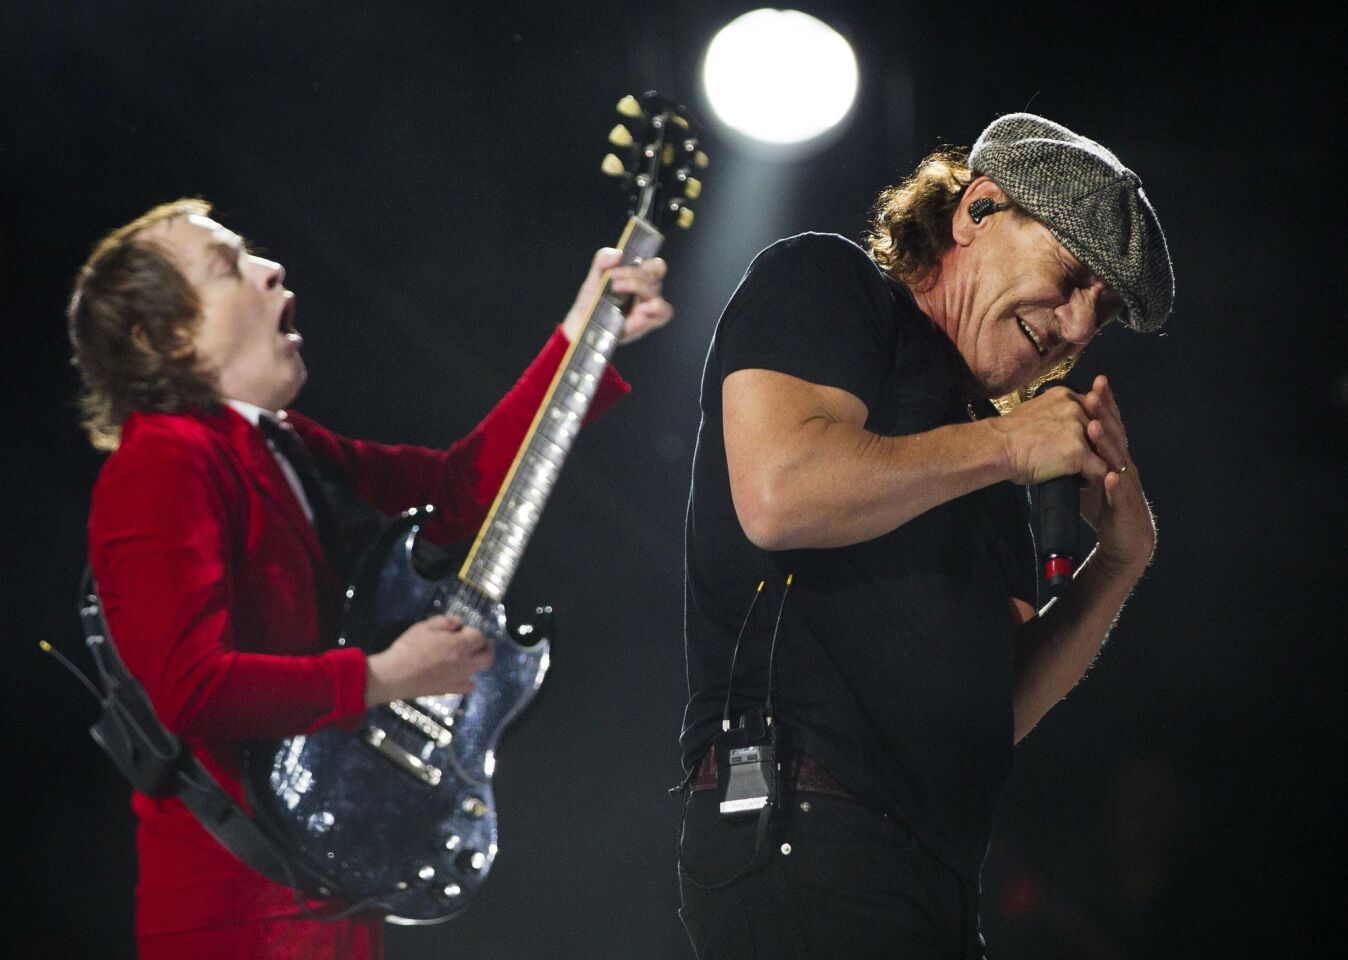 The 2015 Coachella Valley Music and Arts Festival gets underway. ACDC headlined the first night of the festival playing on the Coachella Stage to a huge audience. Guitarist Angus Young and Singer Brian Johnson during the bands set Friday night.